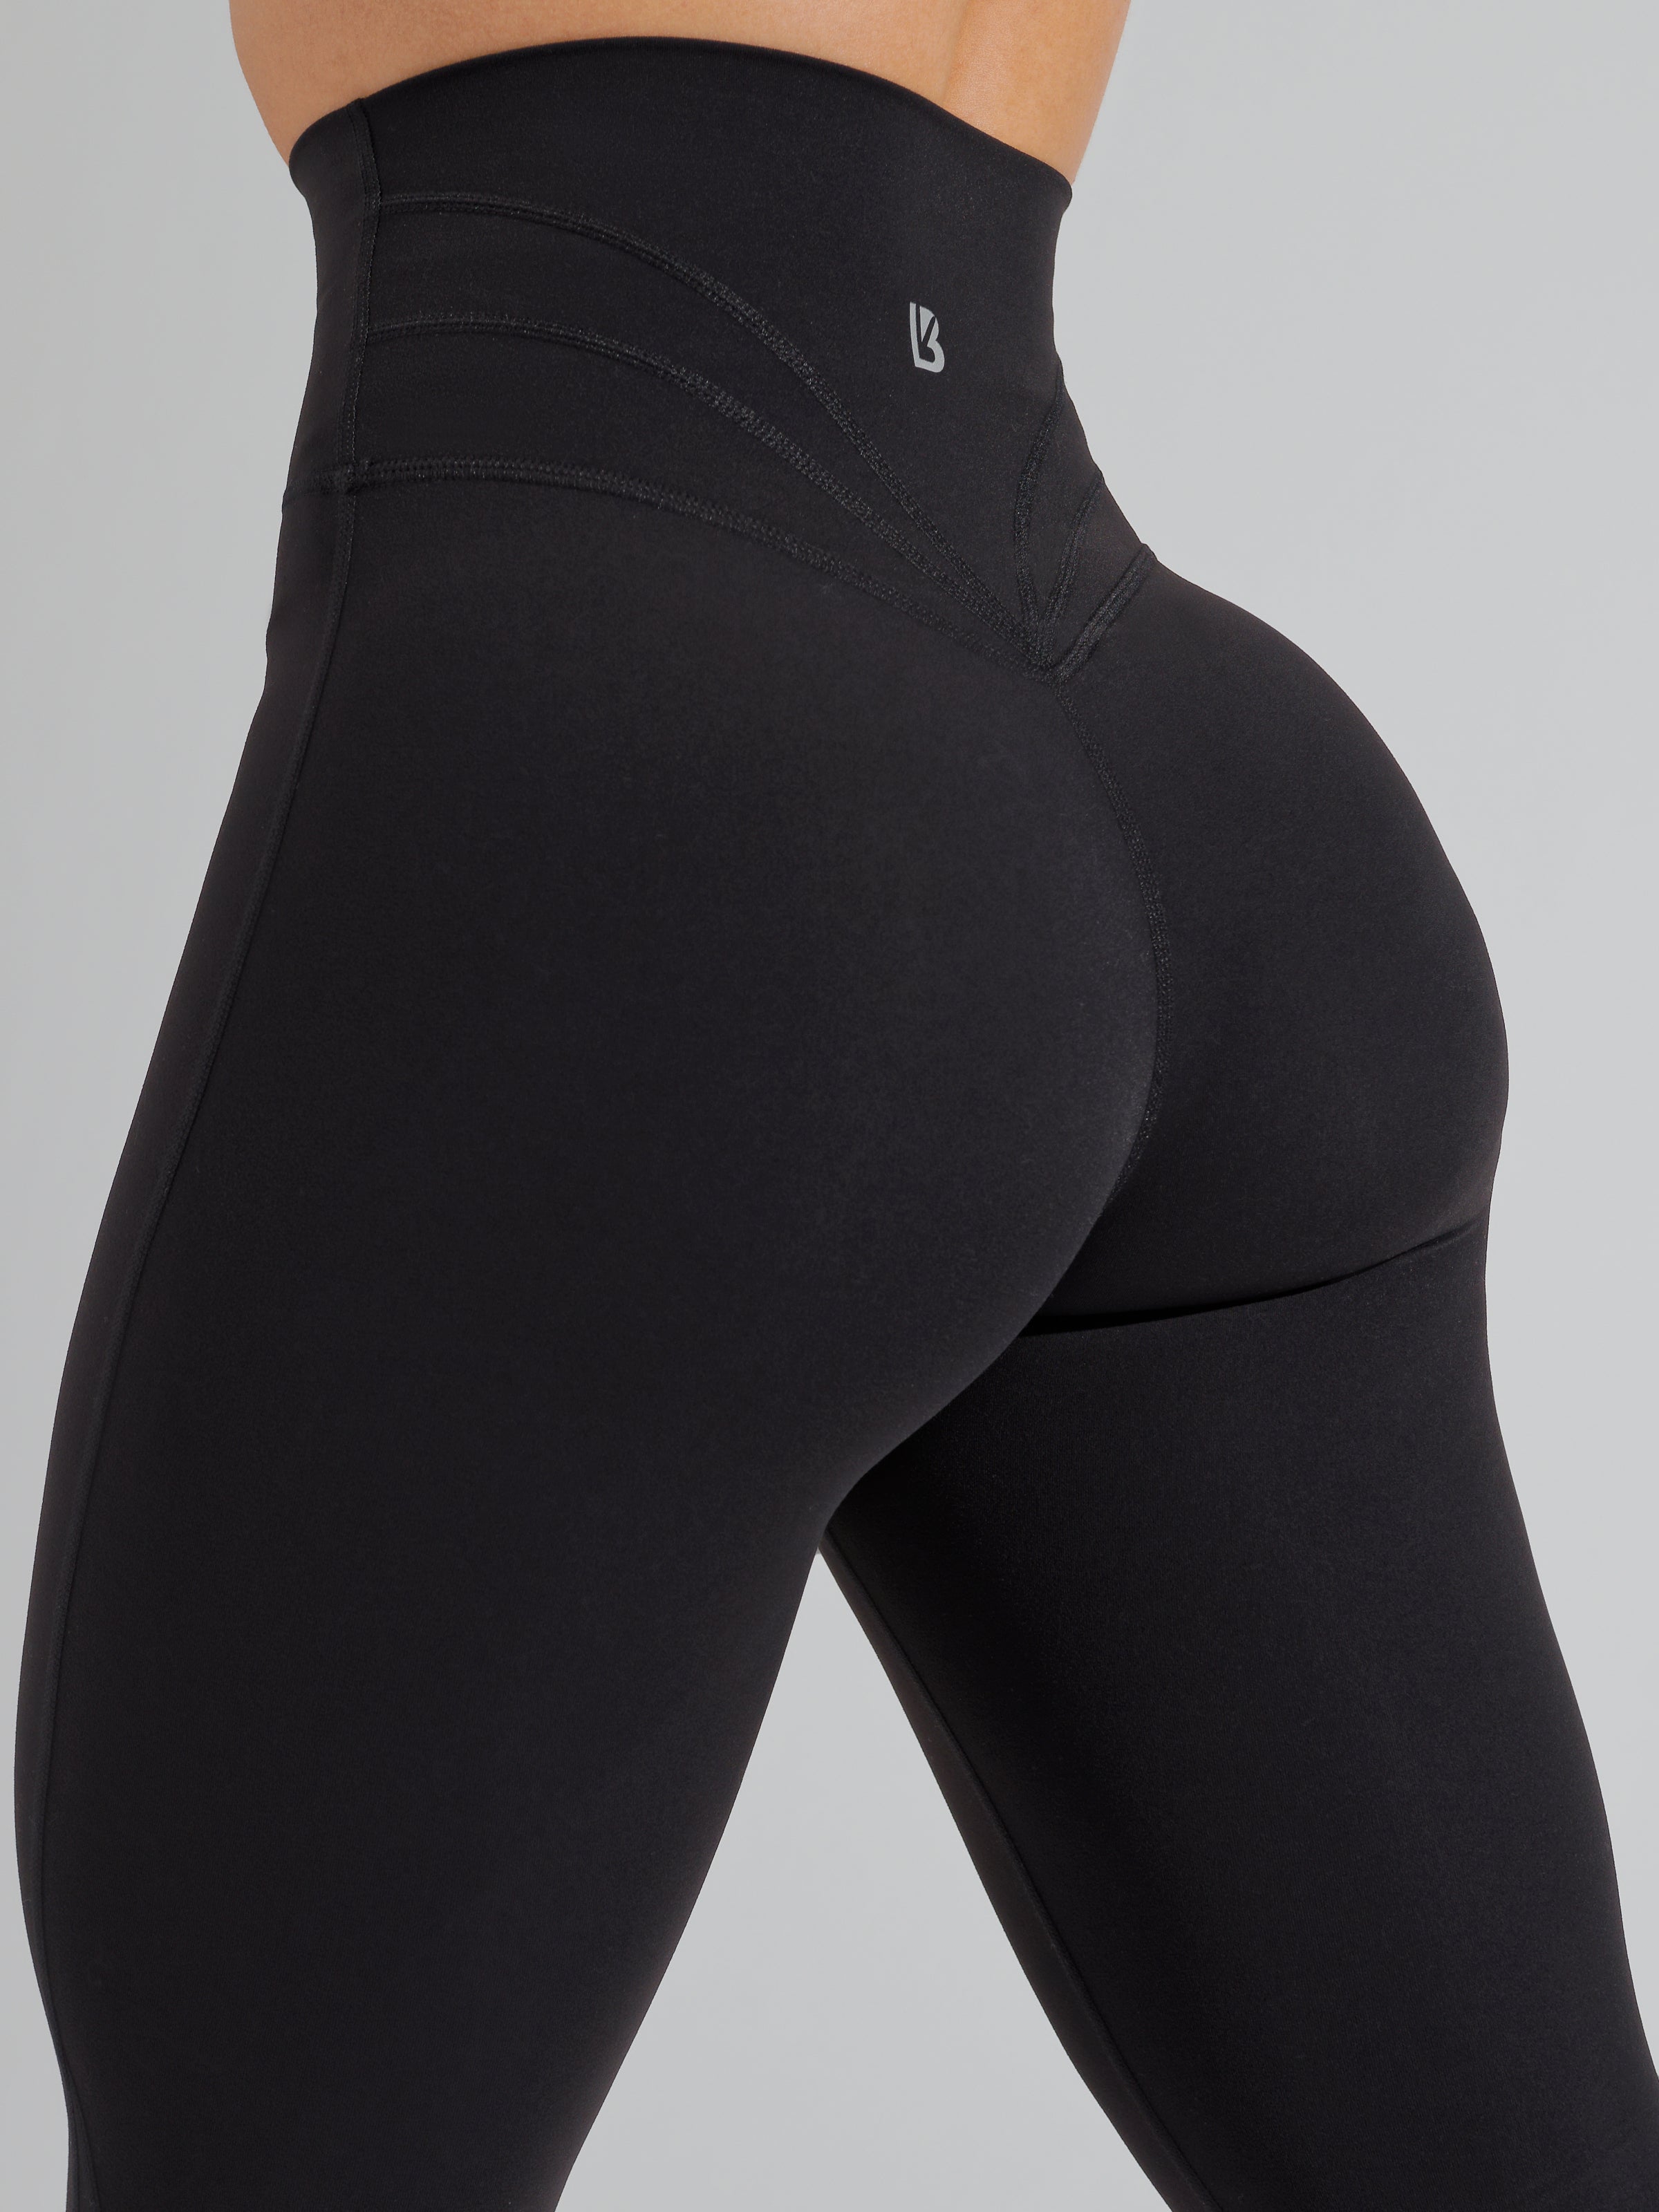 Buff Bunny Black Shiny Leggings Women's Size Medium - $65 New With Tags -  From Jessica